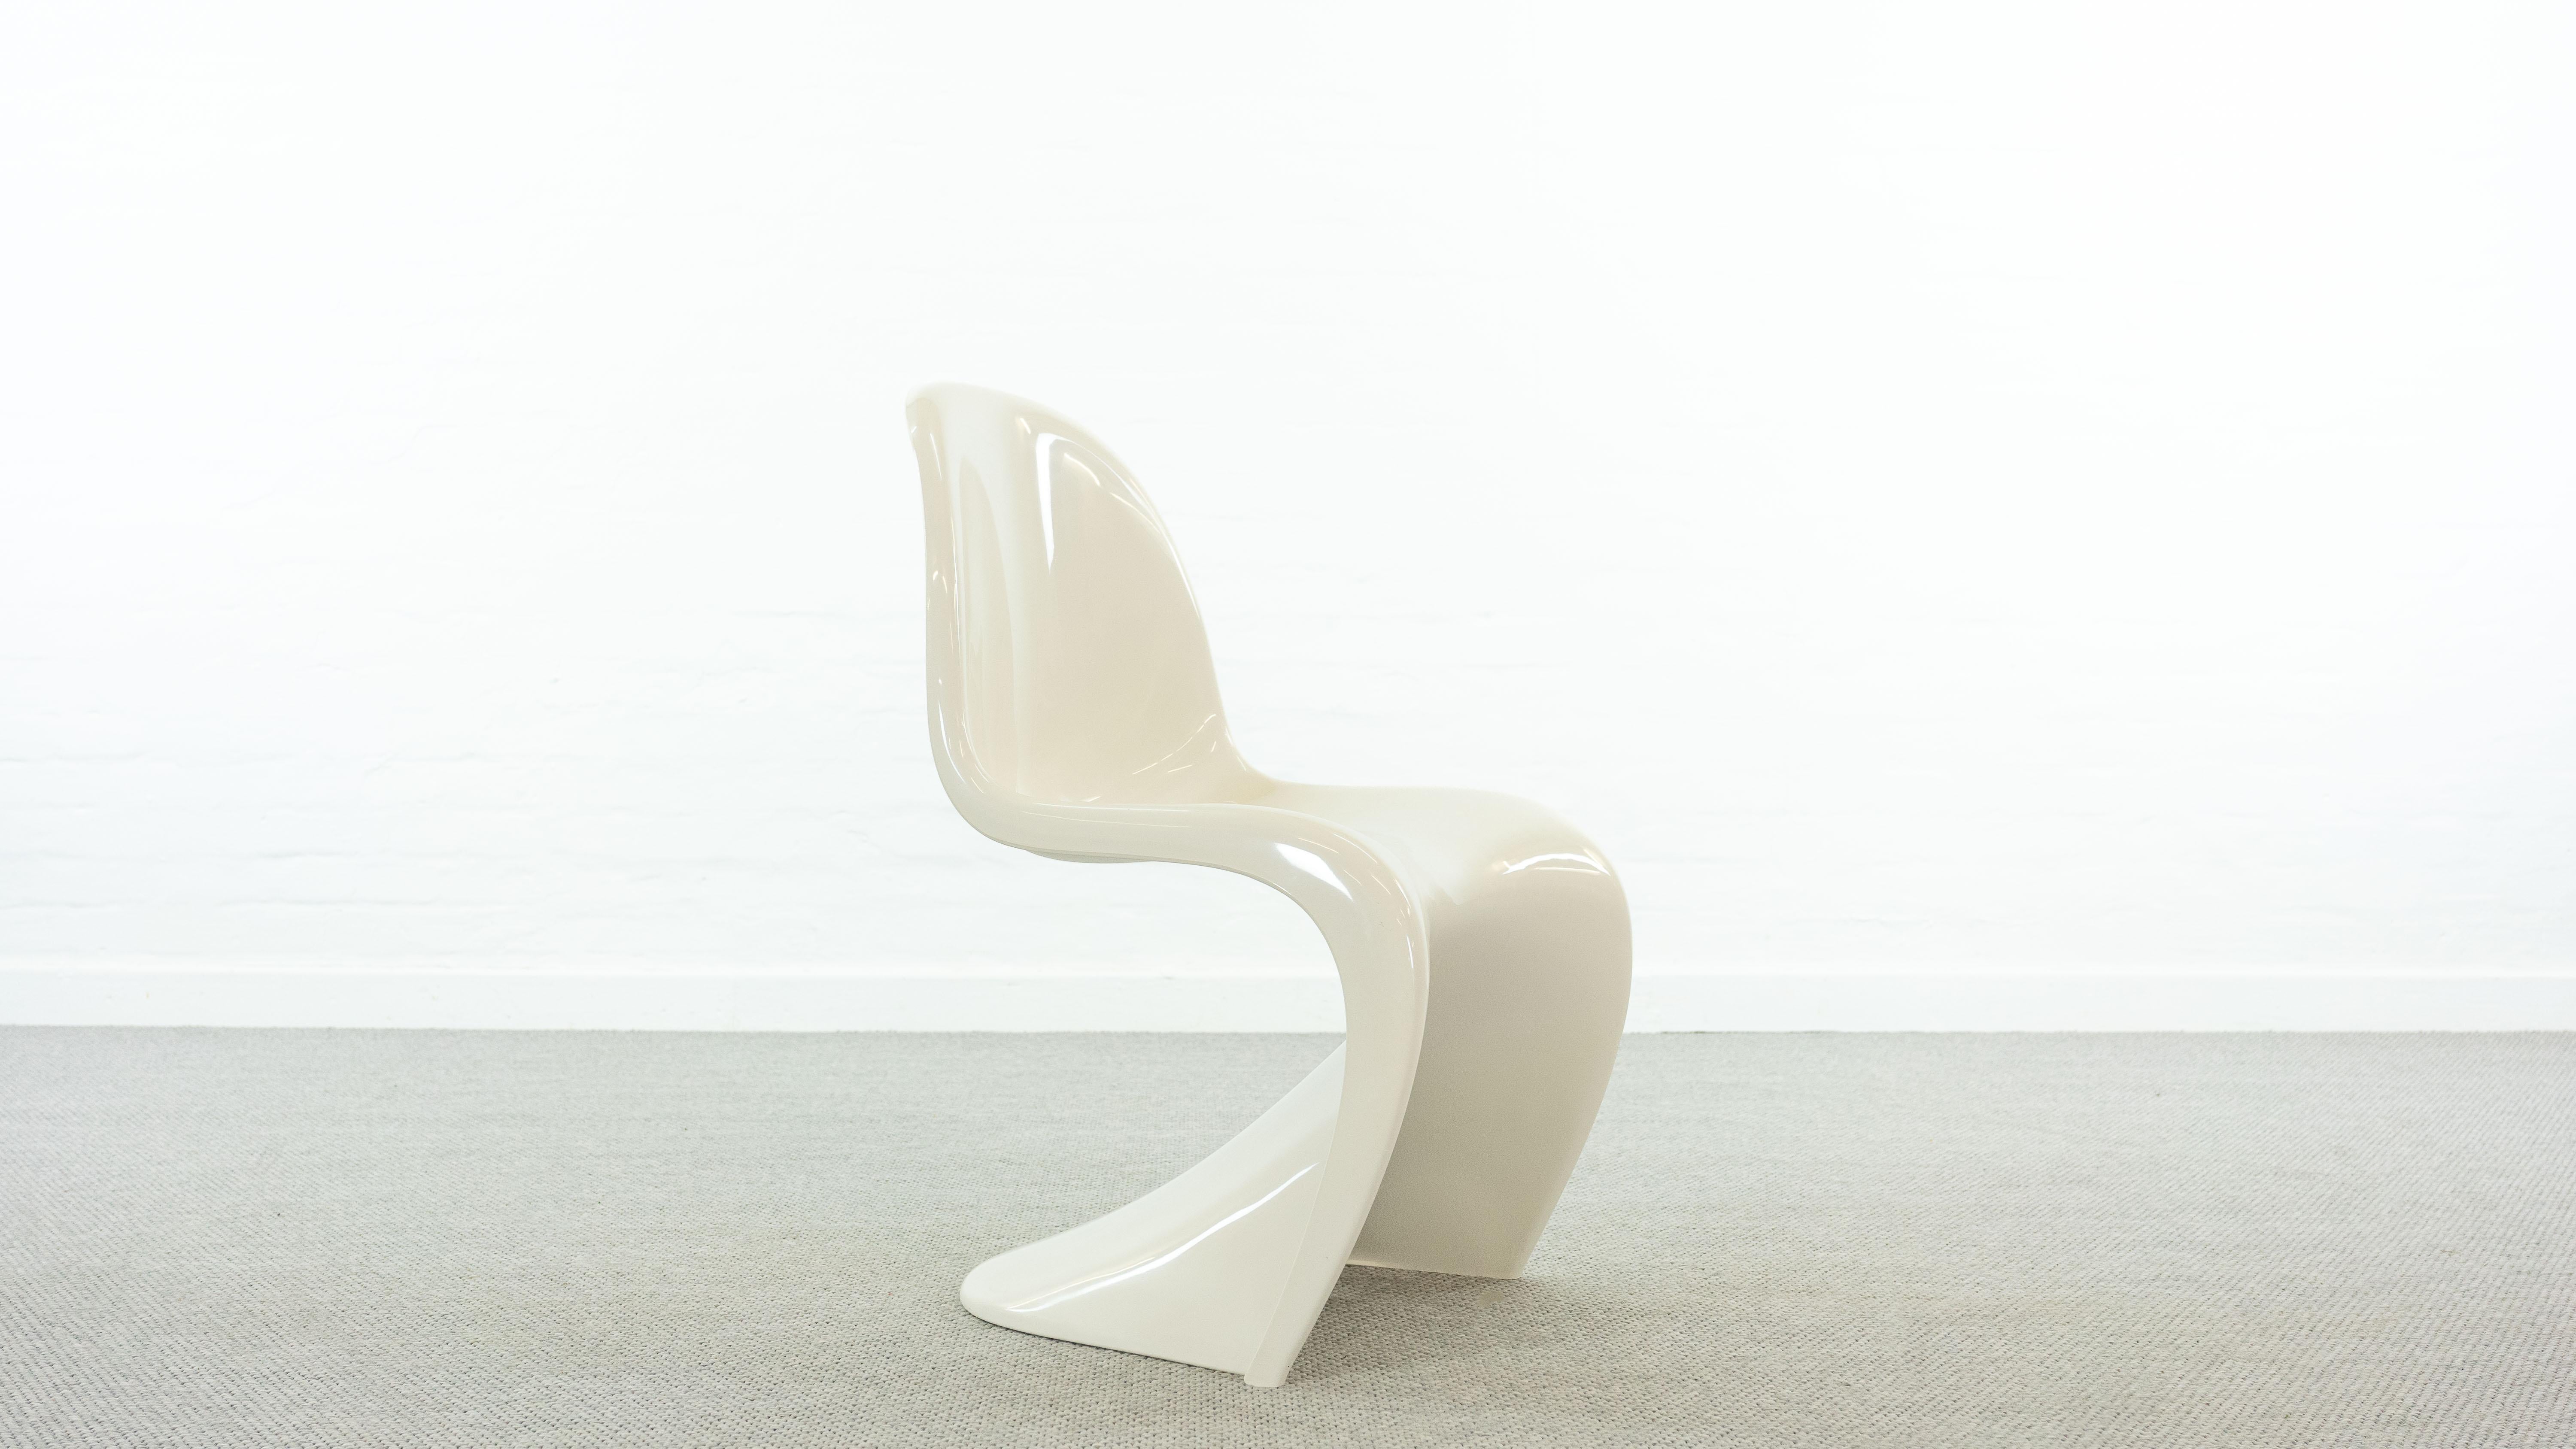 Panton s-chair, designed by Verner Panton for Hermann Miller / Fehlbaum. Color: white. The chair is from the 2nd production run from 1970 onwards in thermoplastic luran-s with reinforcement ribs underneath. Marked with manufacturers logo and